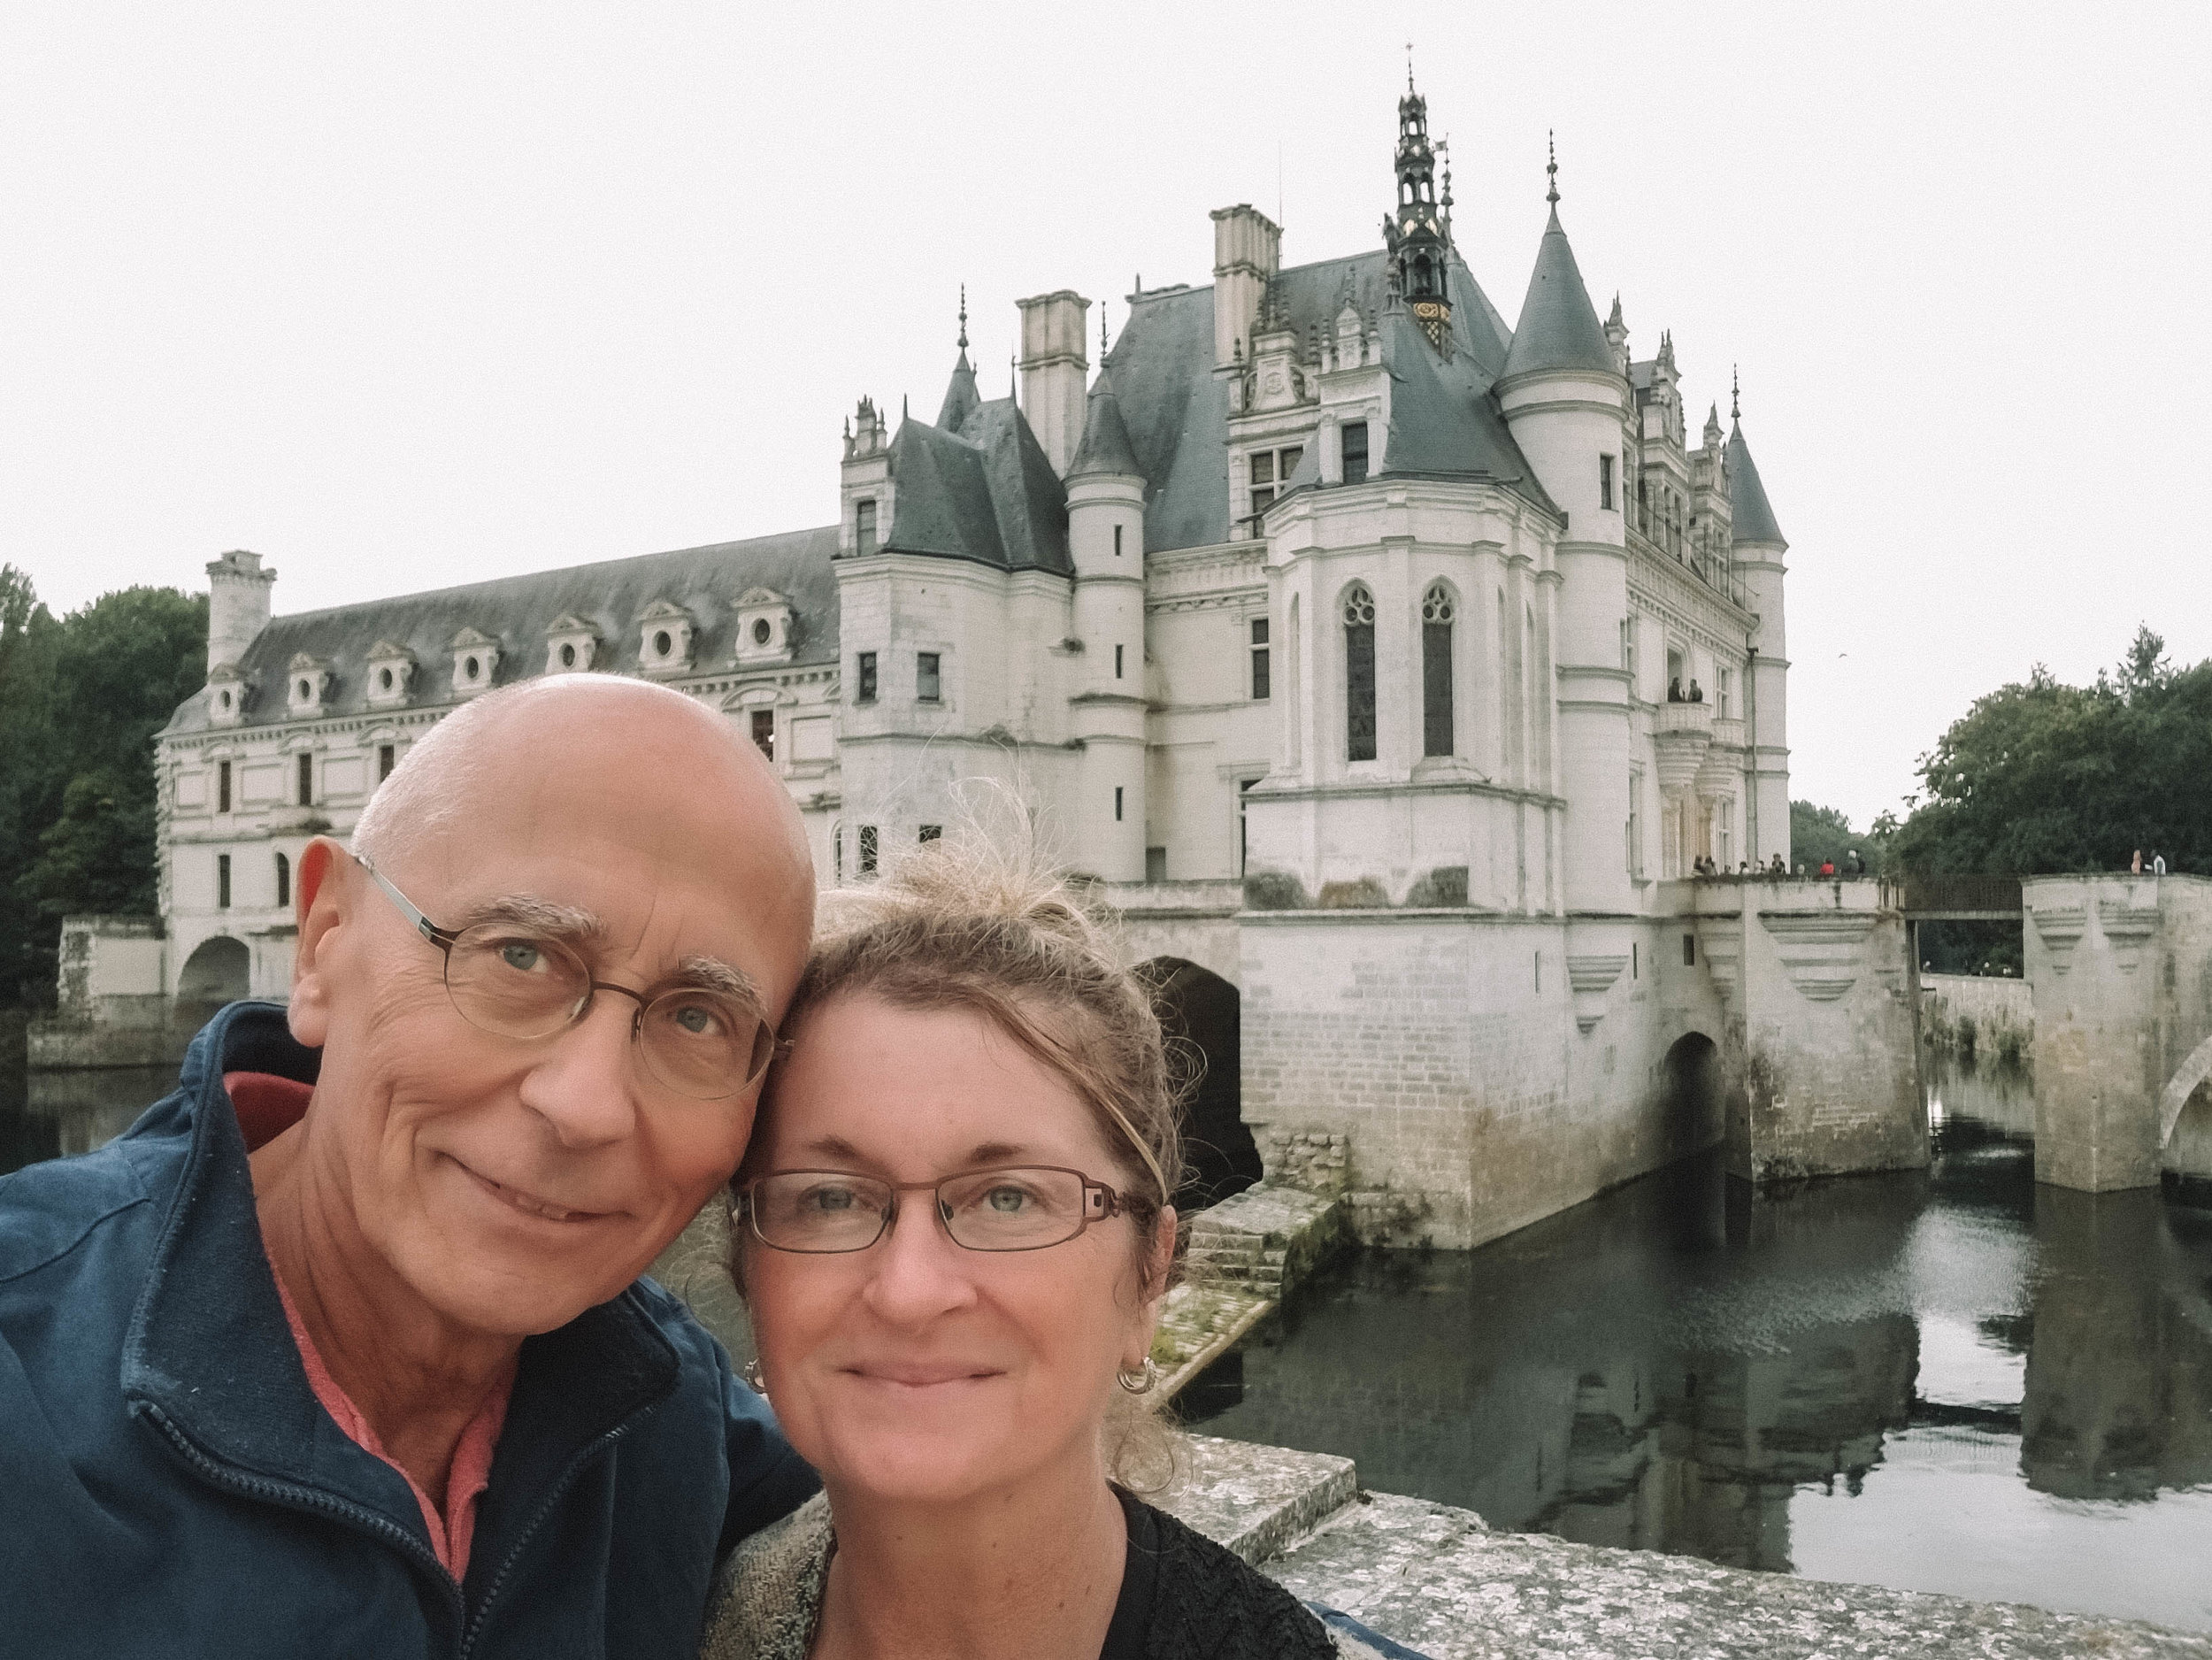 Mom and Dad at the Castle - Chateau de Chenonceau - Loire Valley - France